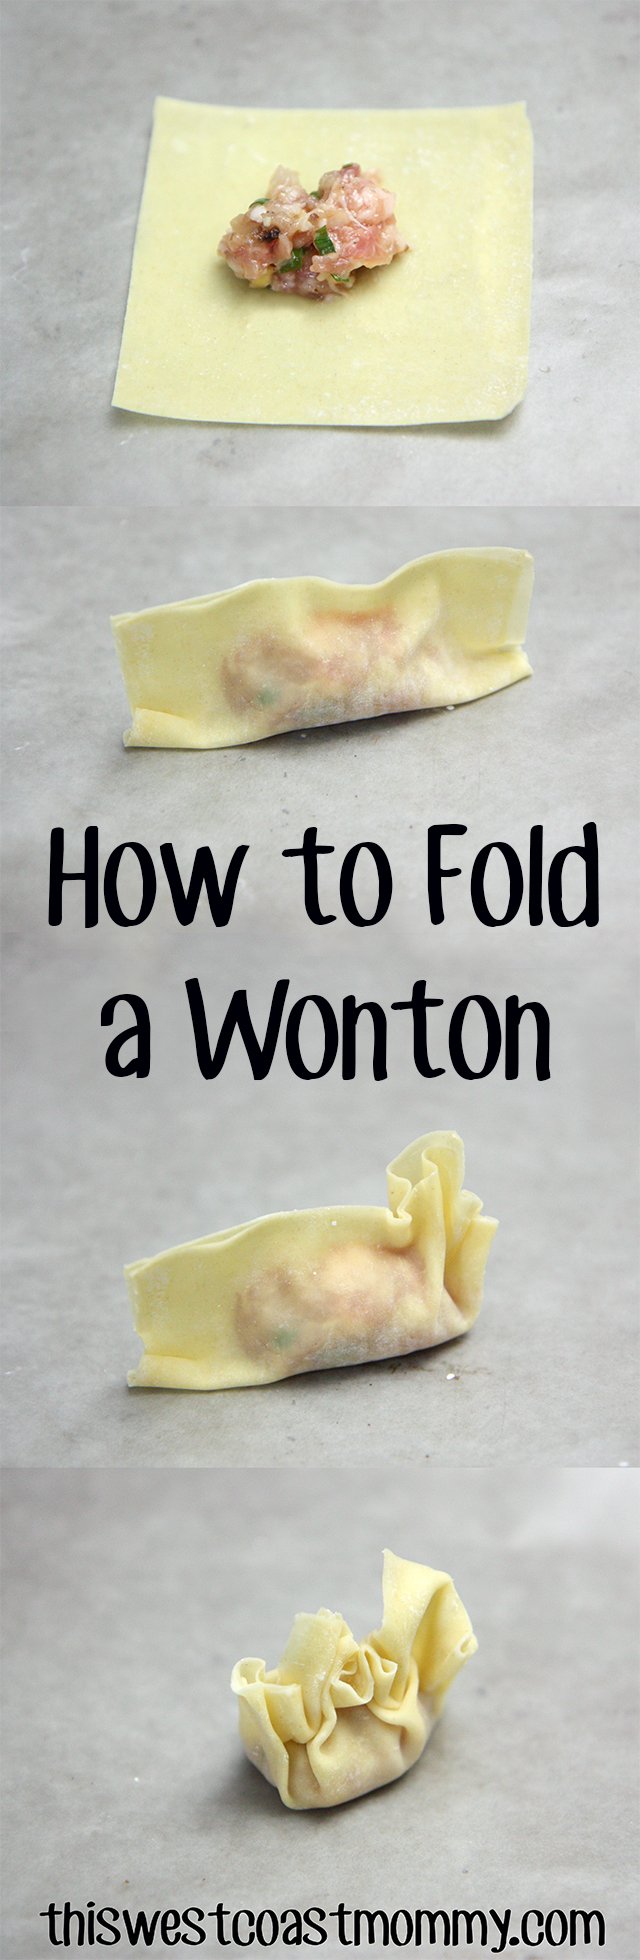 How to fold a wonton. Place a teaspoon of filling in the centre of the wrapper then fold it in half and seal the edges with a bit of water. Gently pleat and gather the free edges together and press to seal.